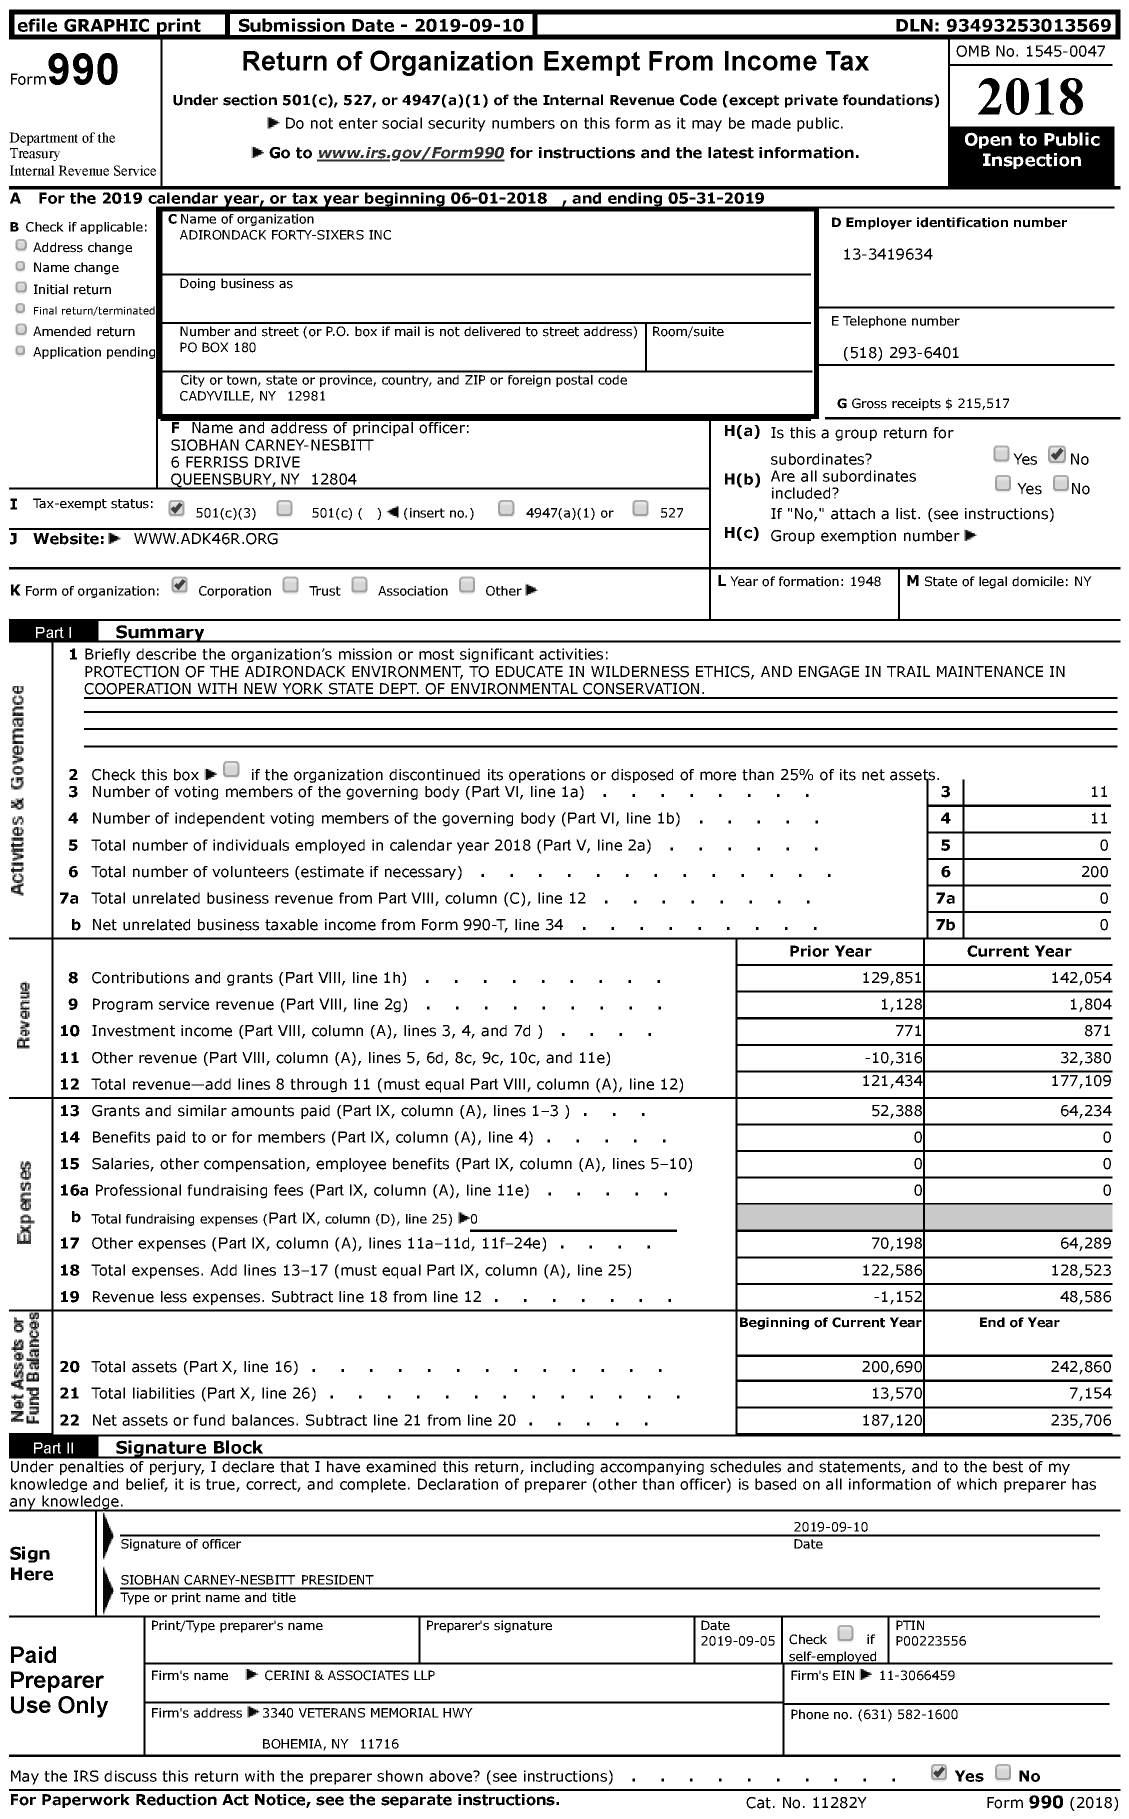 Image of first page of 2018 Form 990 for Adirondack Forty-Sixers